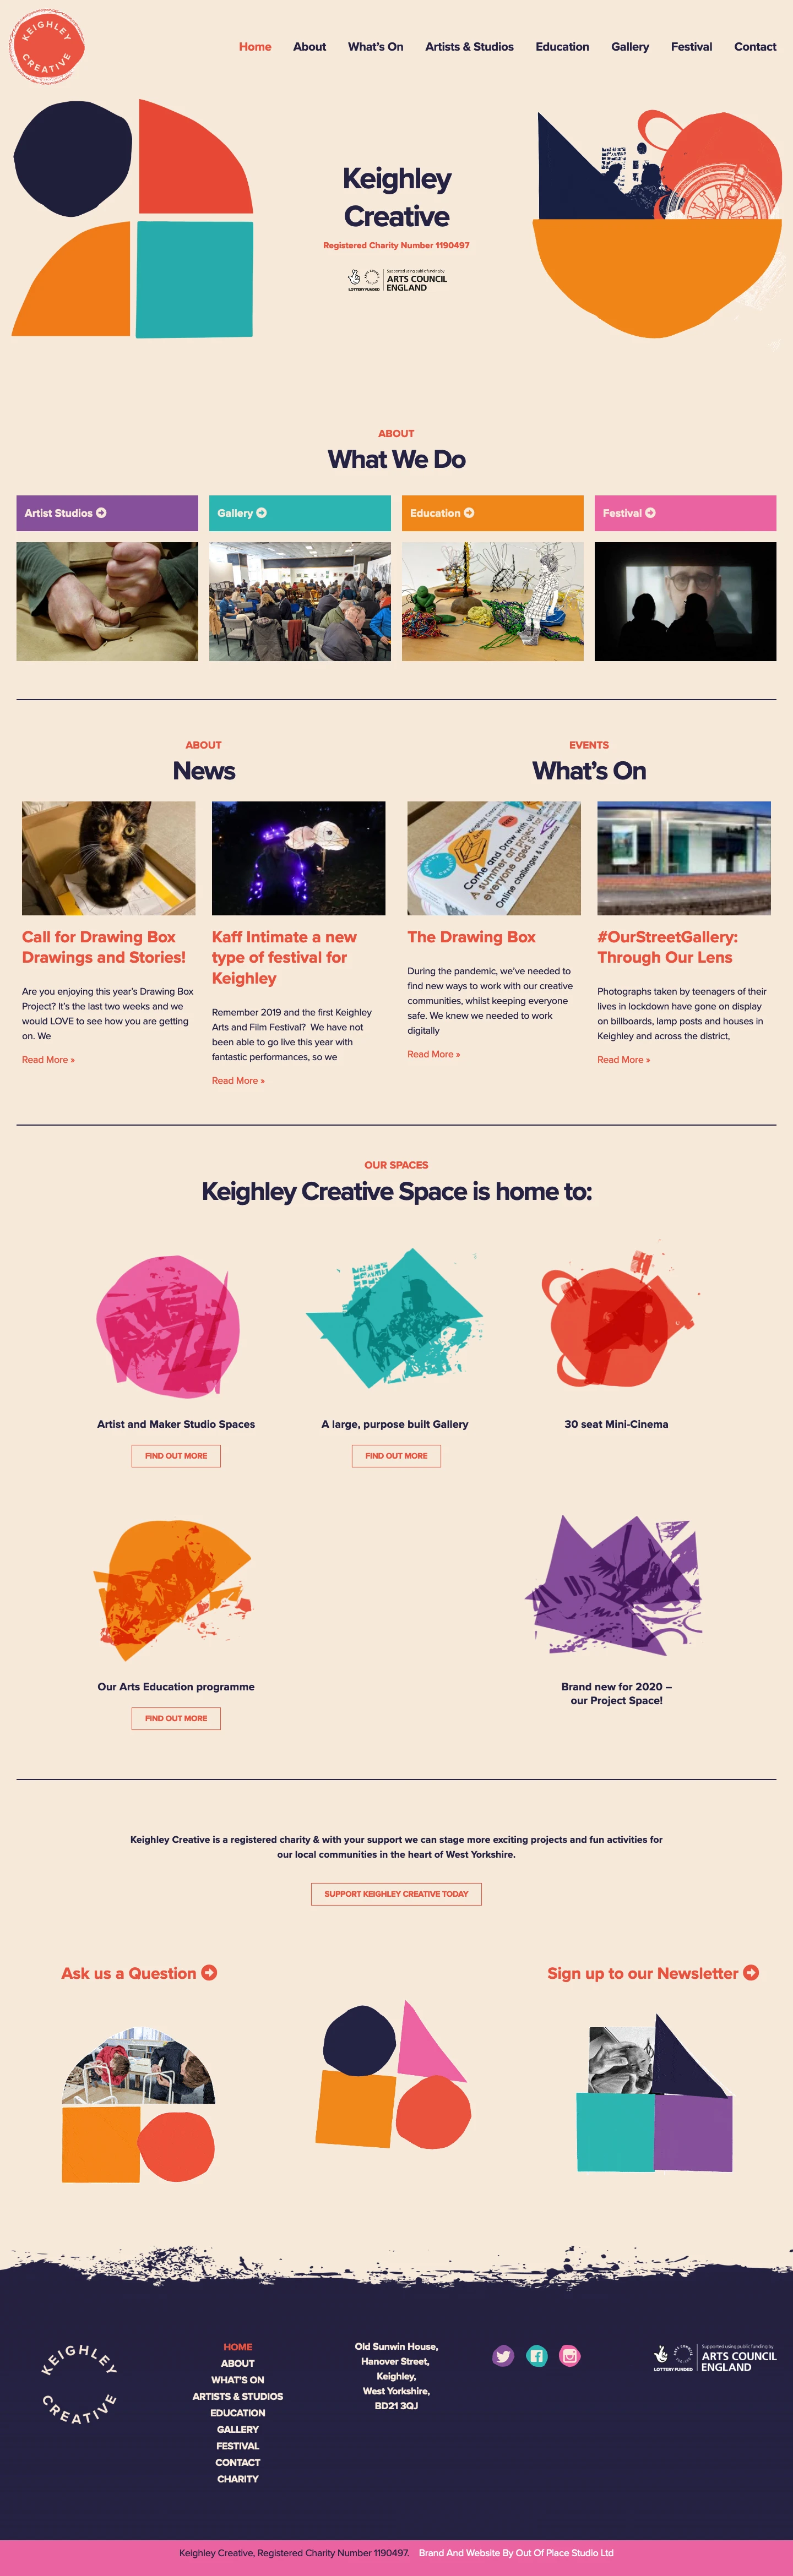 Keighley Creative Landing Page Example: Here at Keighley Creative, we do things a little bit differently. As a local charity, we’re here to bring our community a diverse range of arts and cultures, but we couldn’t do it without you. We believe that our artists and the public should have a say in what services we provide, so we listen to what you want, and we do our best to make it happen.